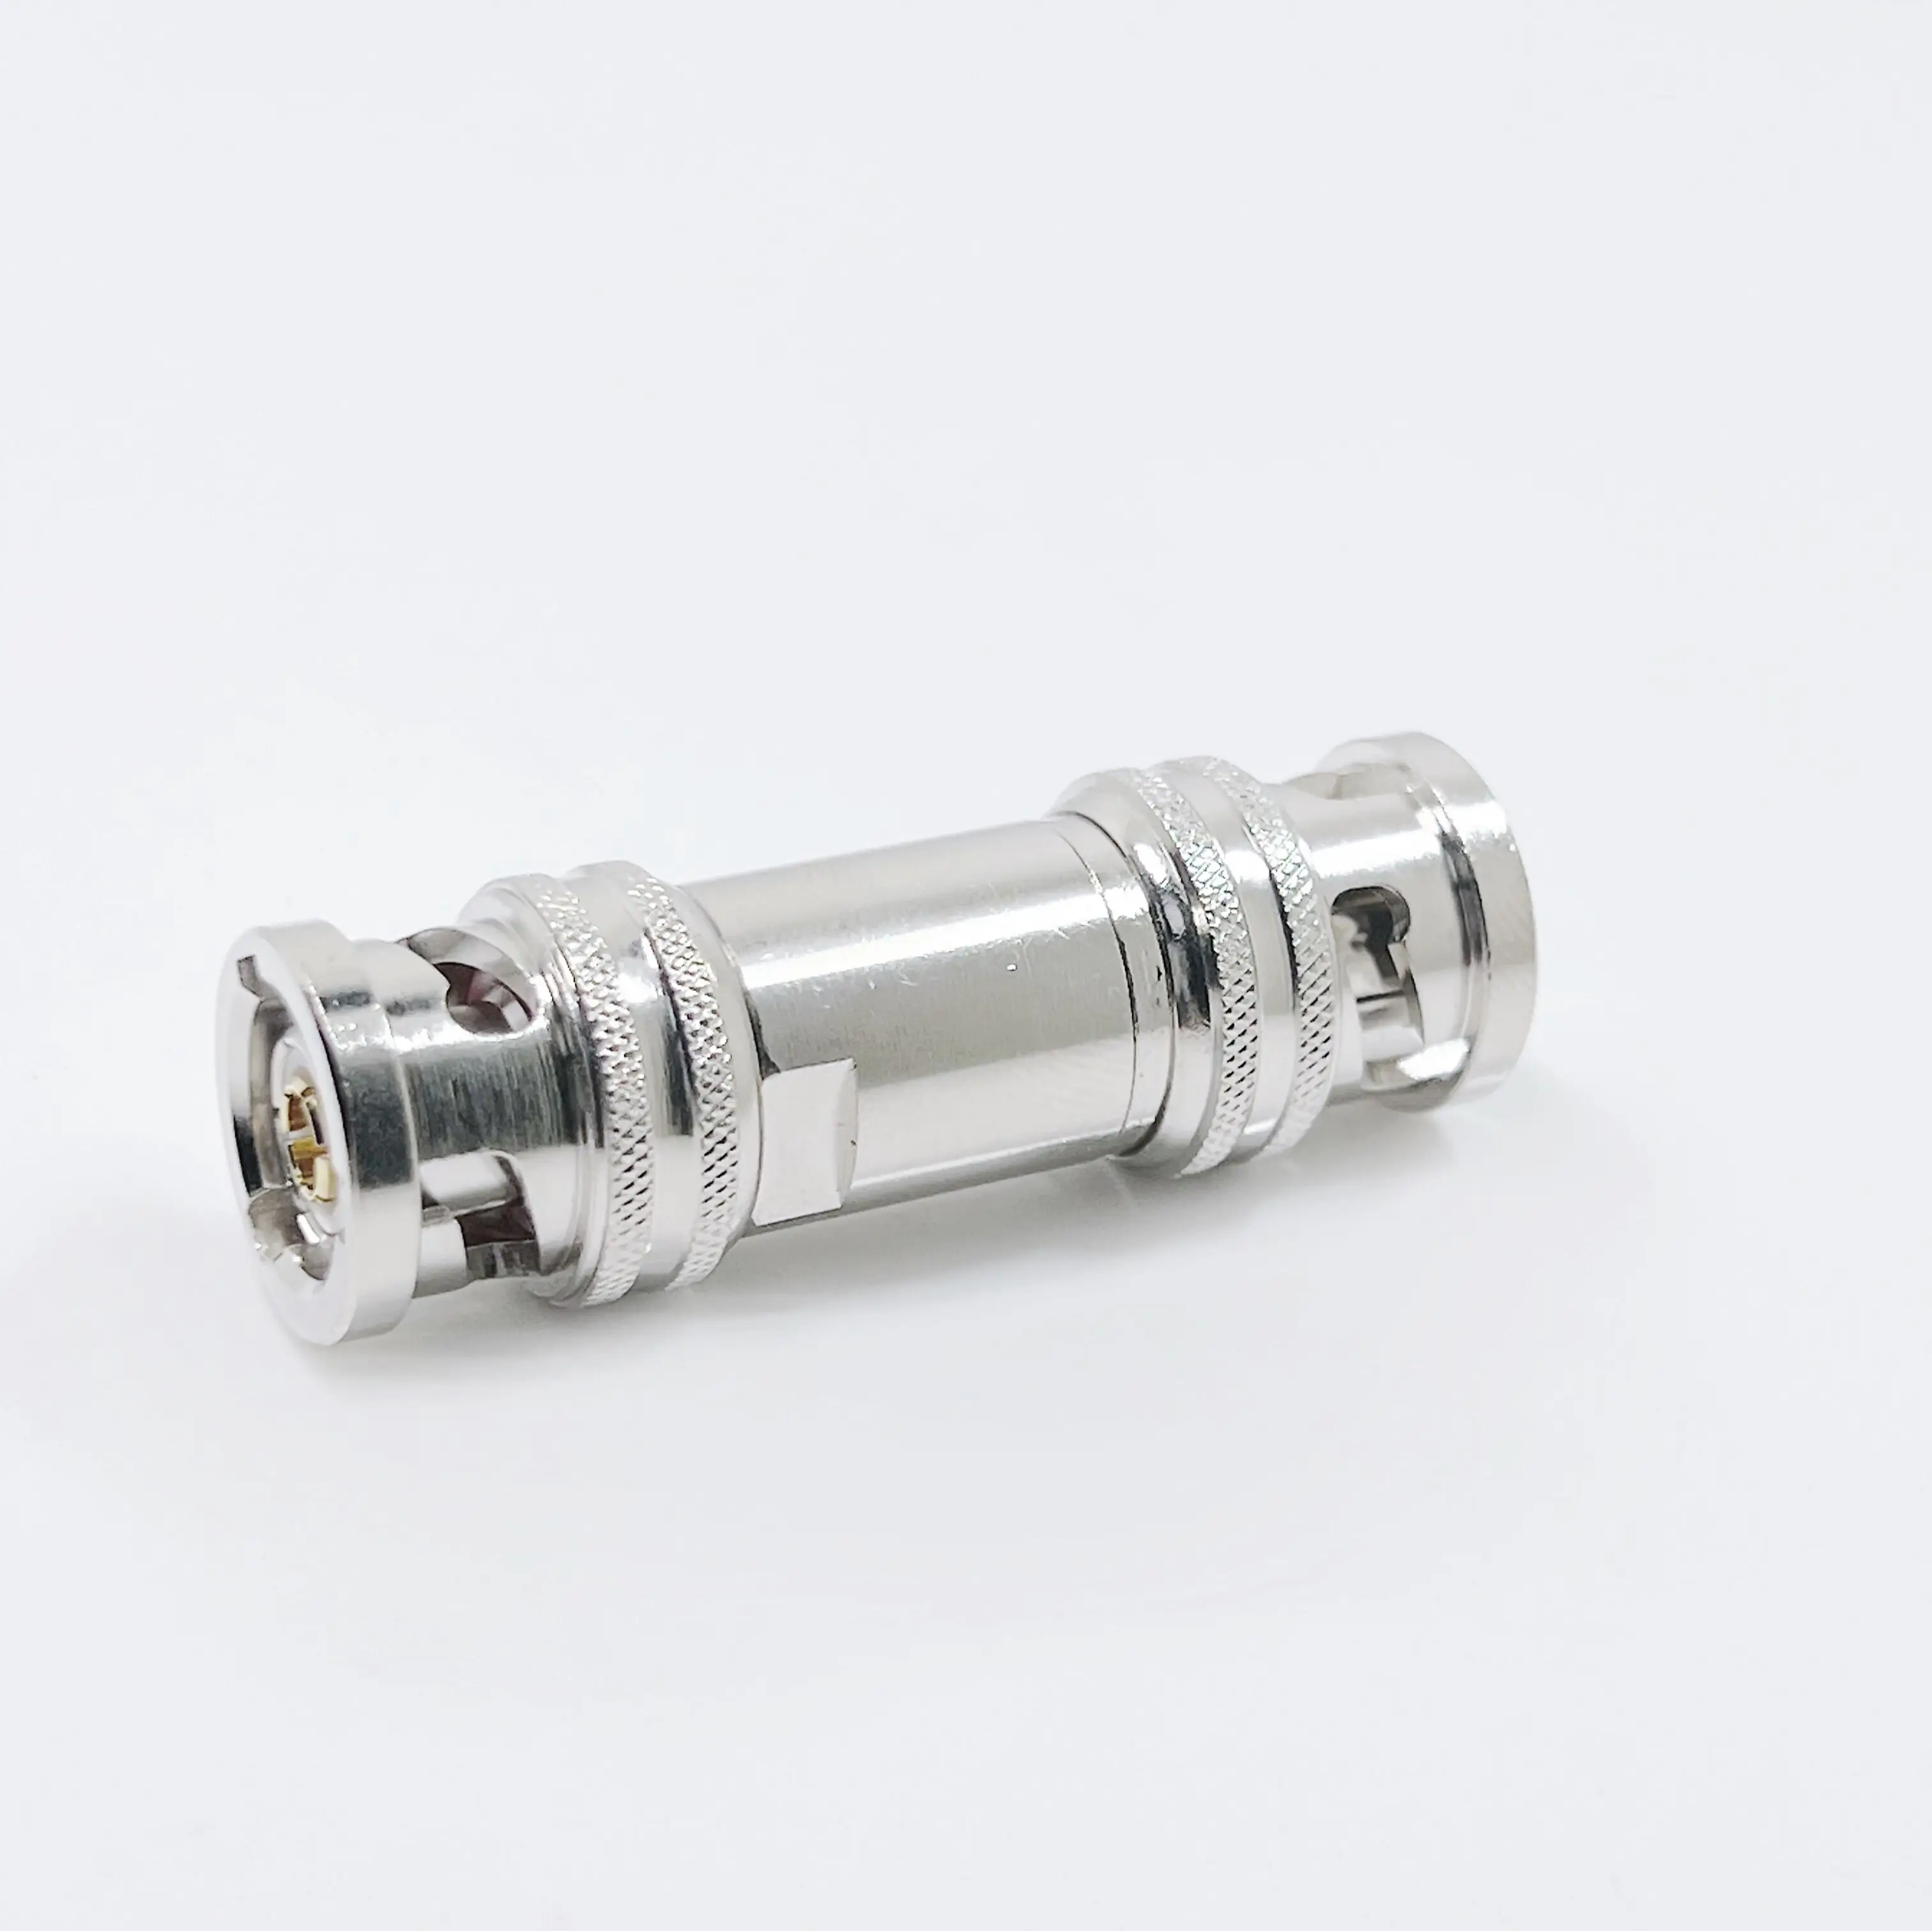 Nickel Plated RF Coaxial 1553B TRB BNC Triaxial Male to BNC Triaxial Male Adapter details